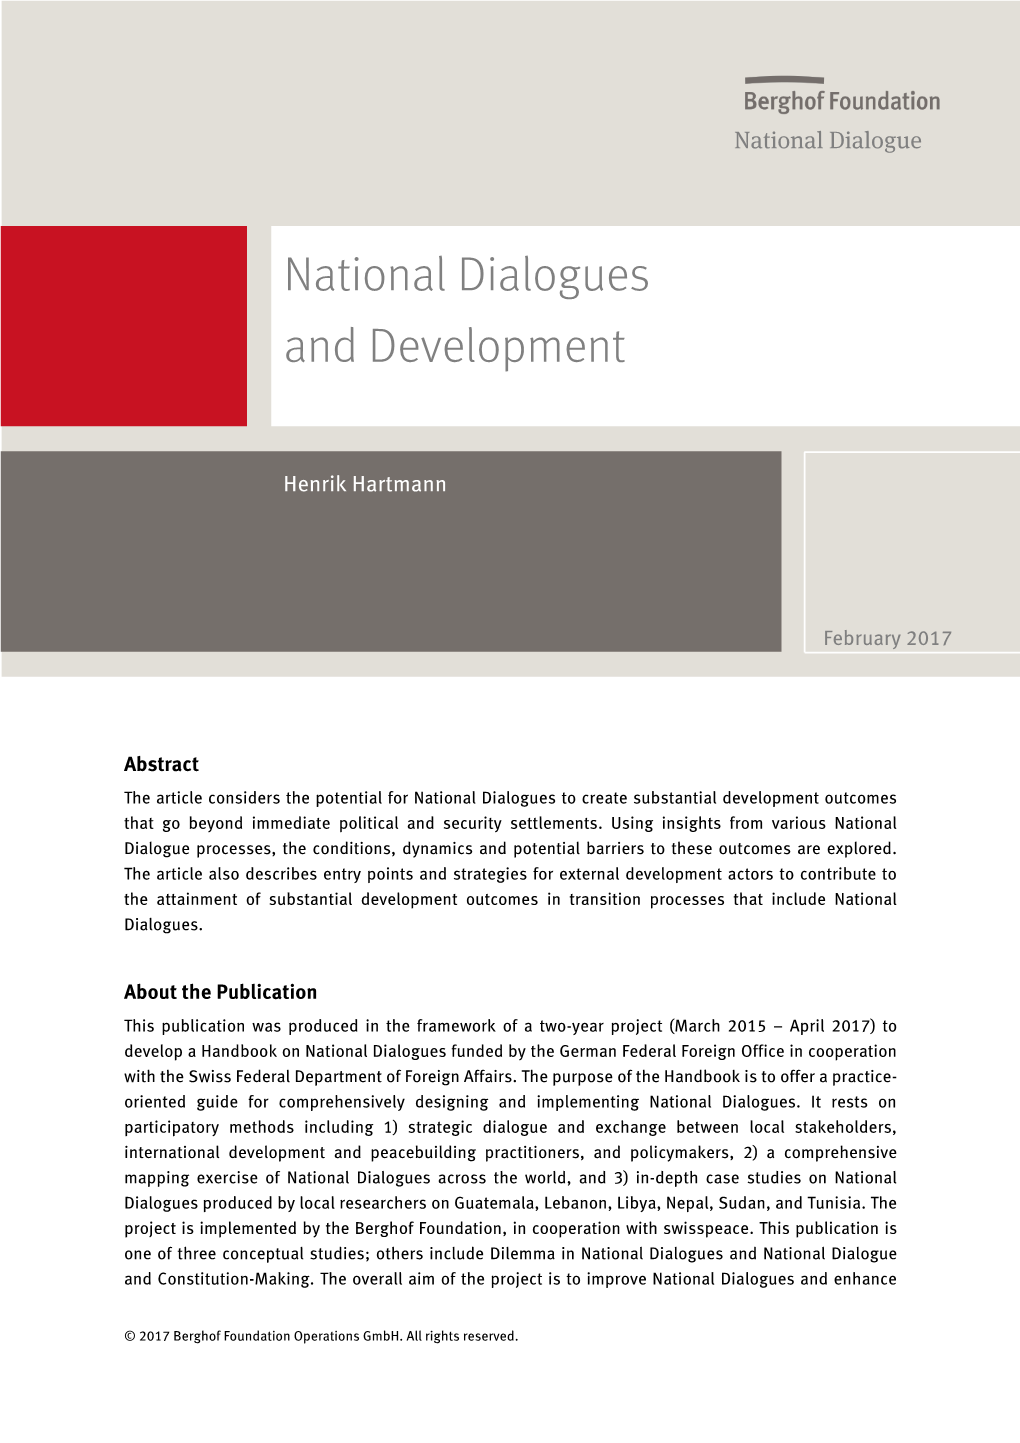 National Dialogues and Development